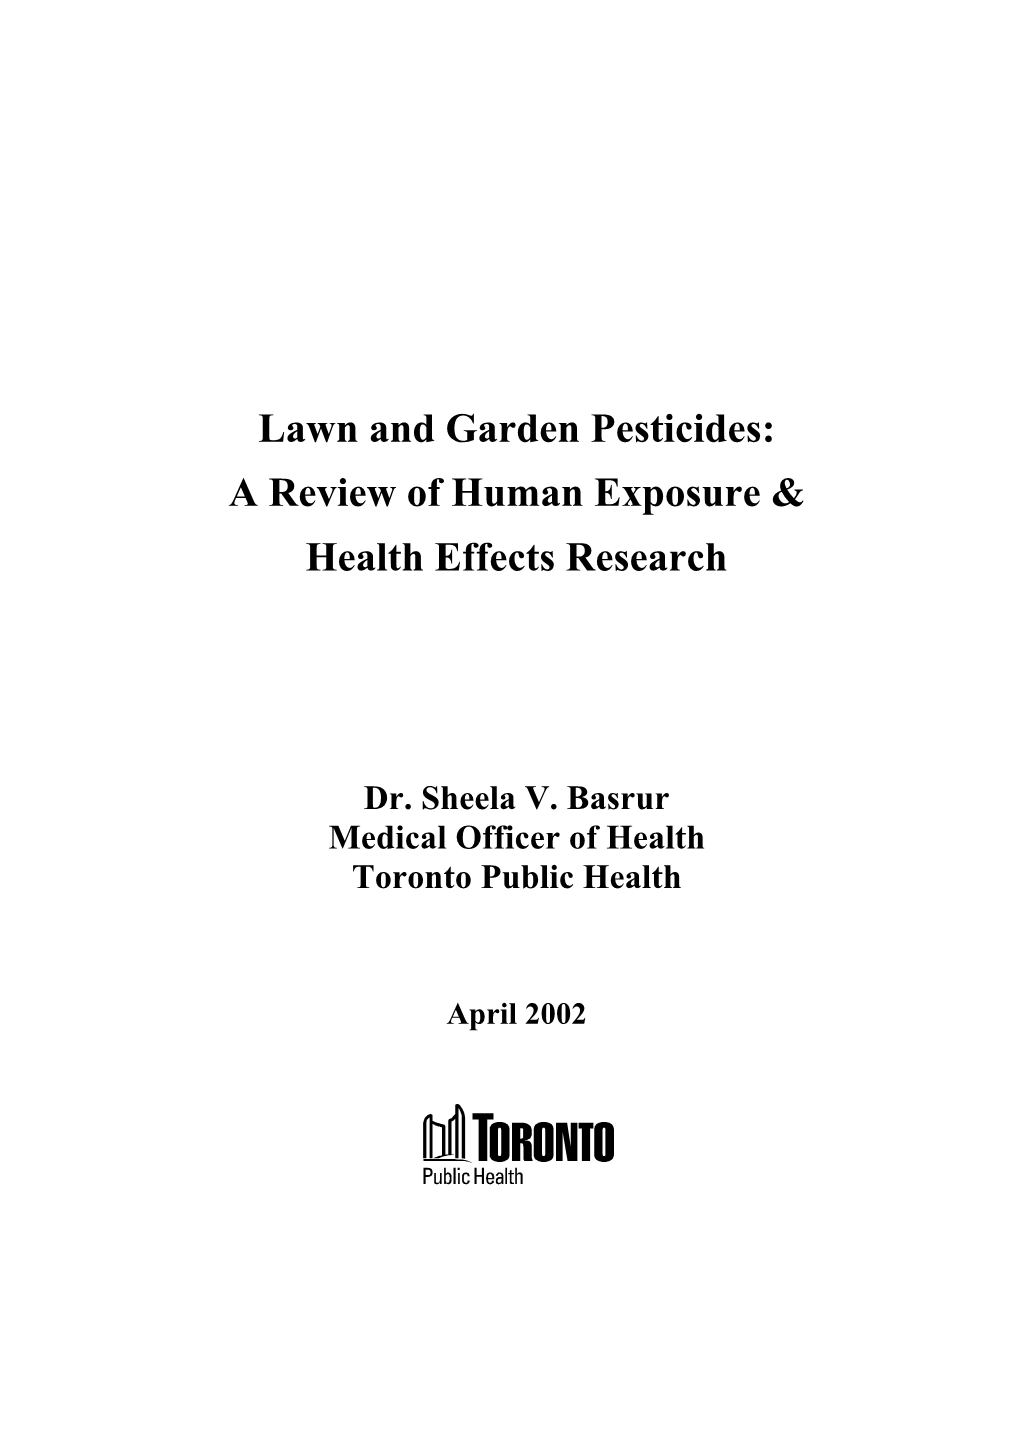 Lawn and Garden Pesticides: a Review of Human Exposure & Health Effects Research